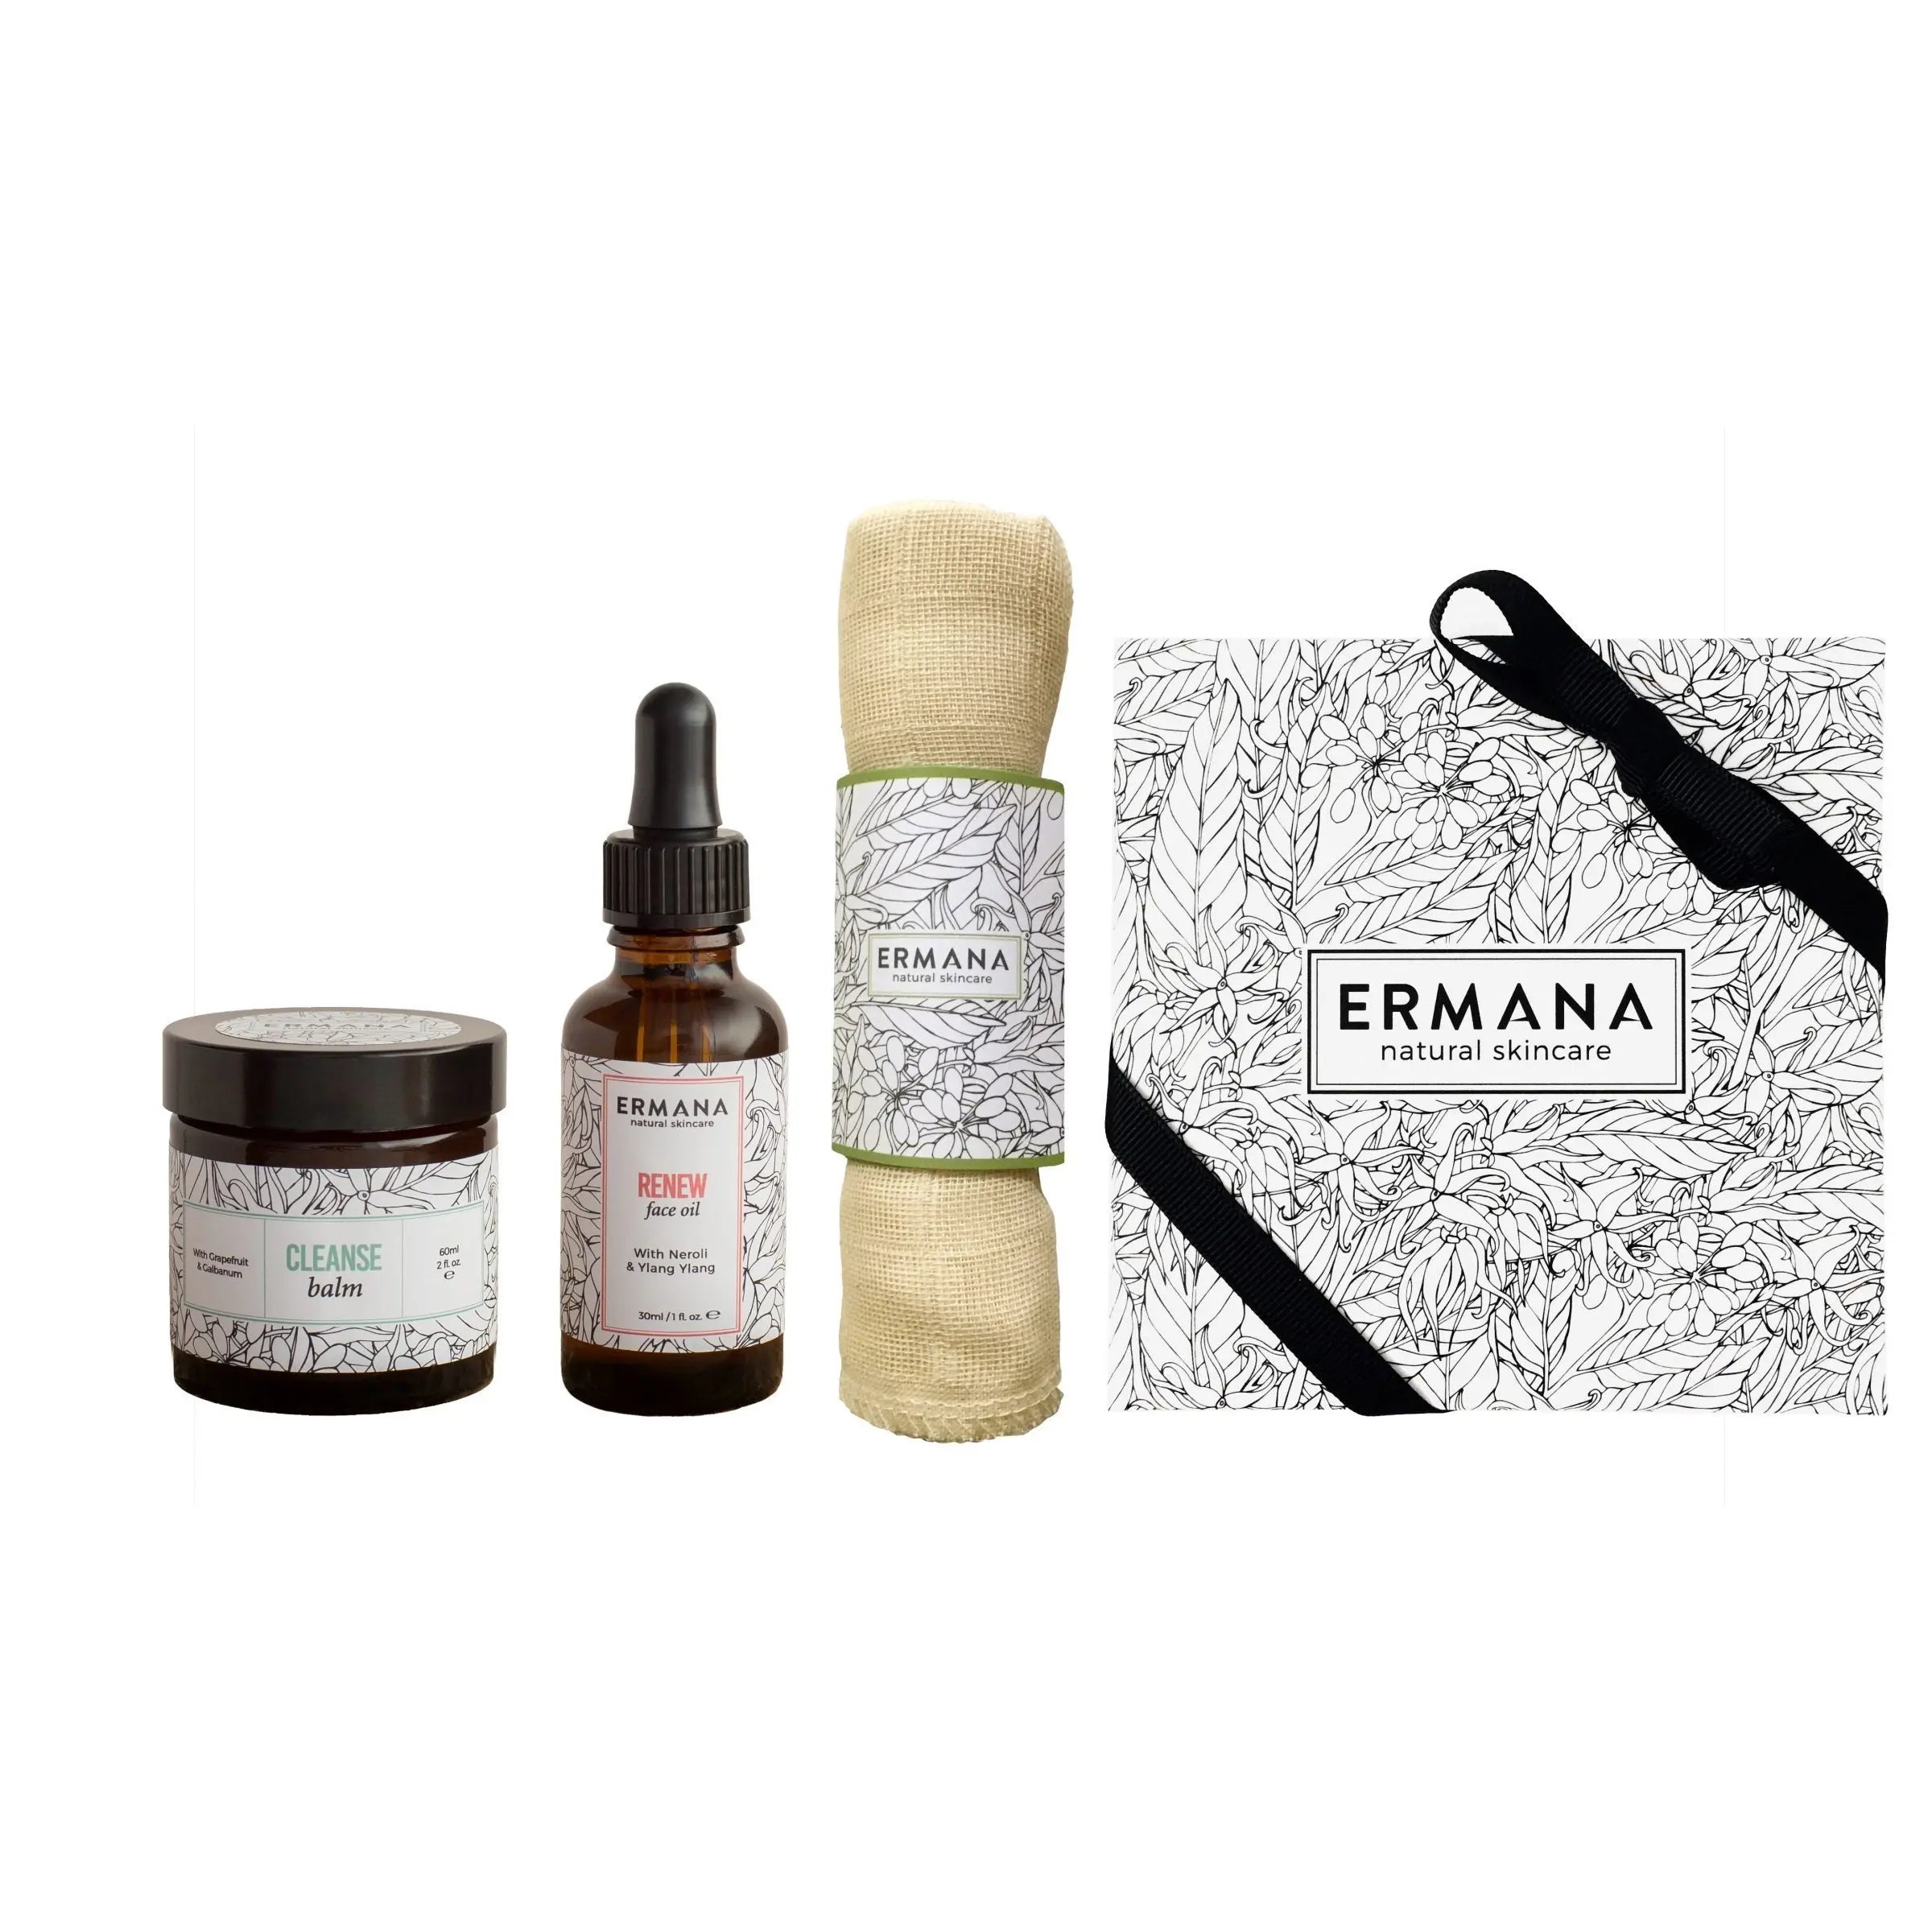 Renew Gift Set with renew face oil and cleanse balm - Ermana Natural Skincare 